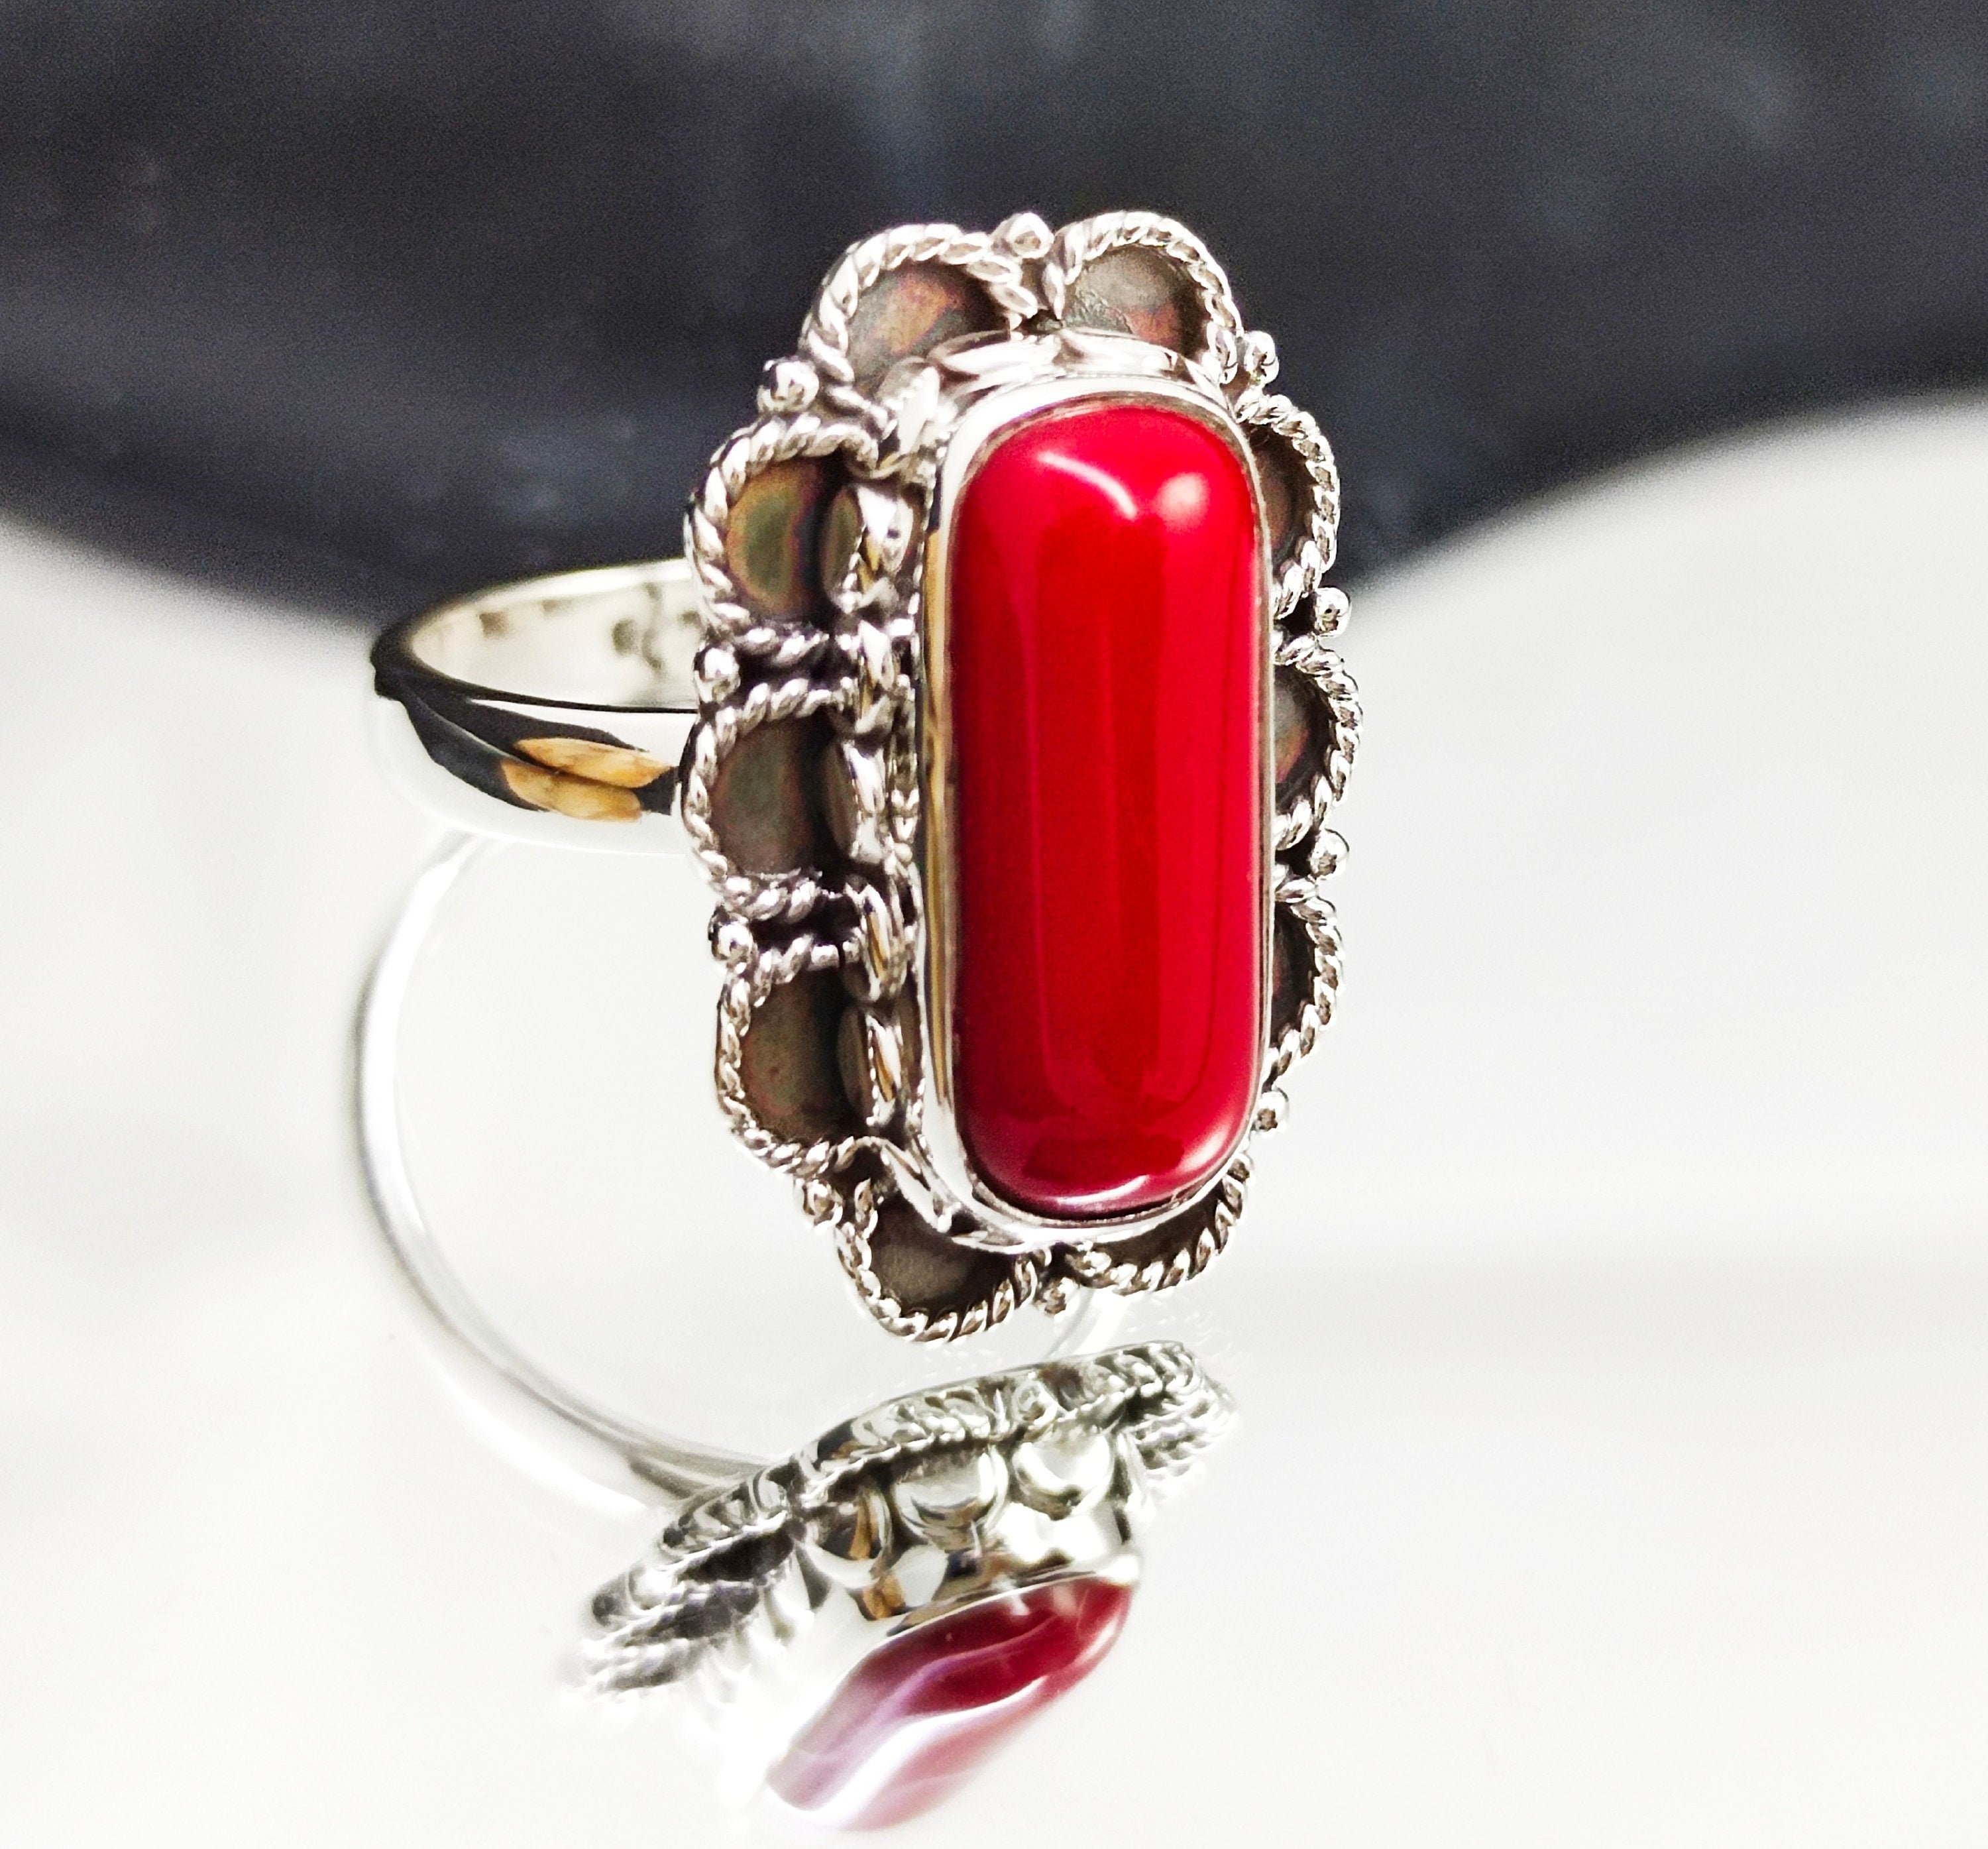 55Carat Red Coral Ring 6 Carat Stone Sterling Silver Prong Handmade Ring  Size 4,5,6,7,8,9,10,11,12,13|Amazon.com